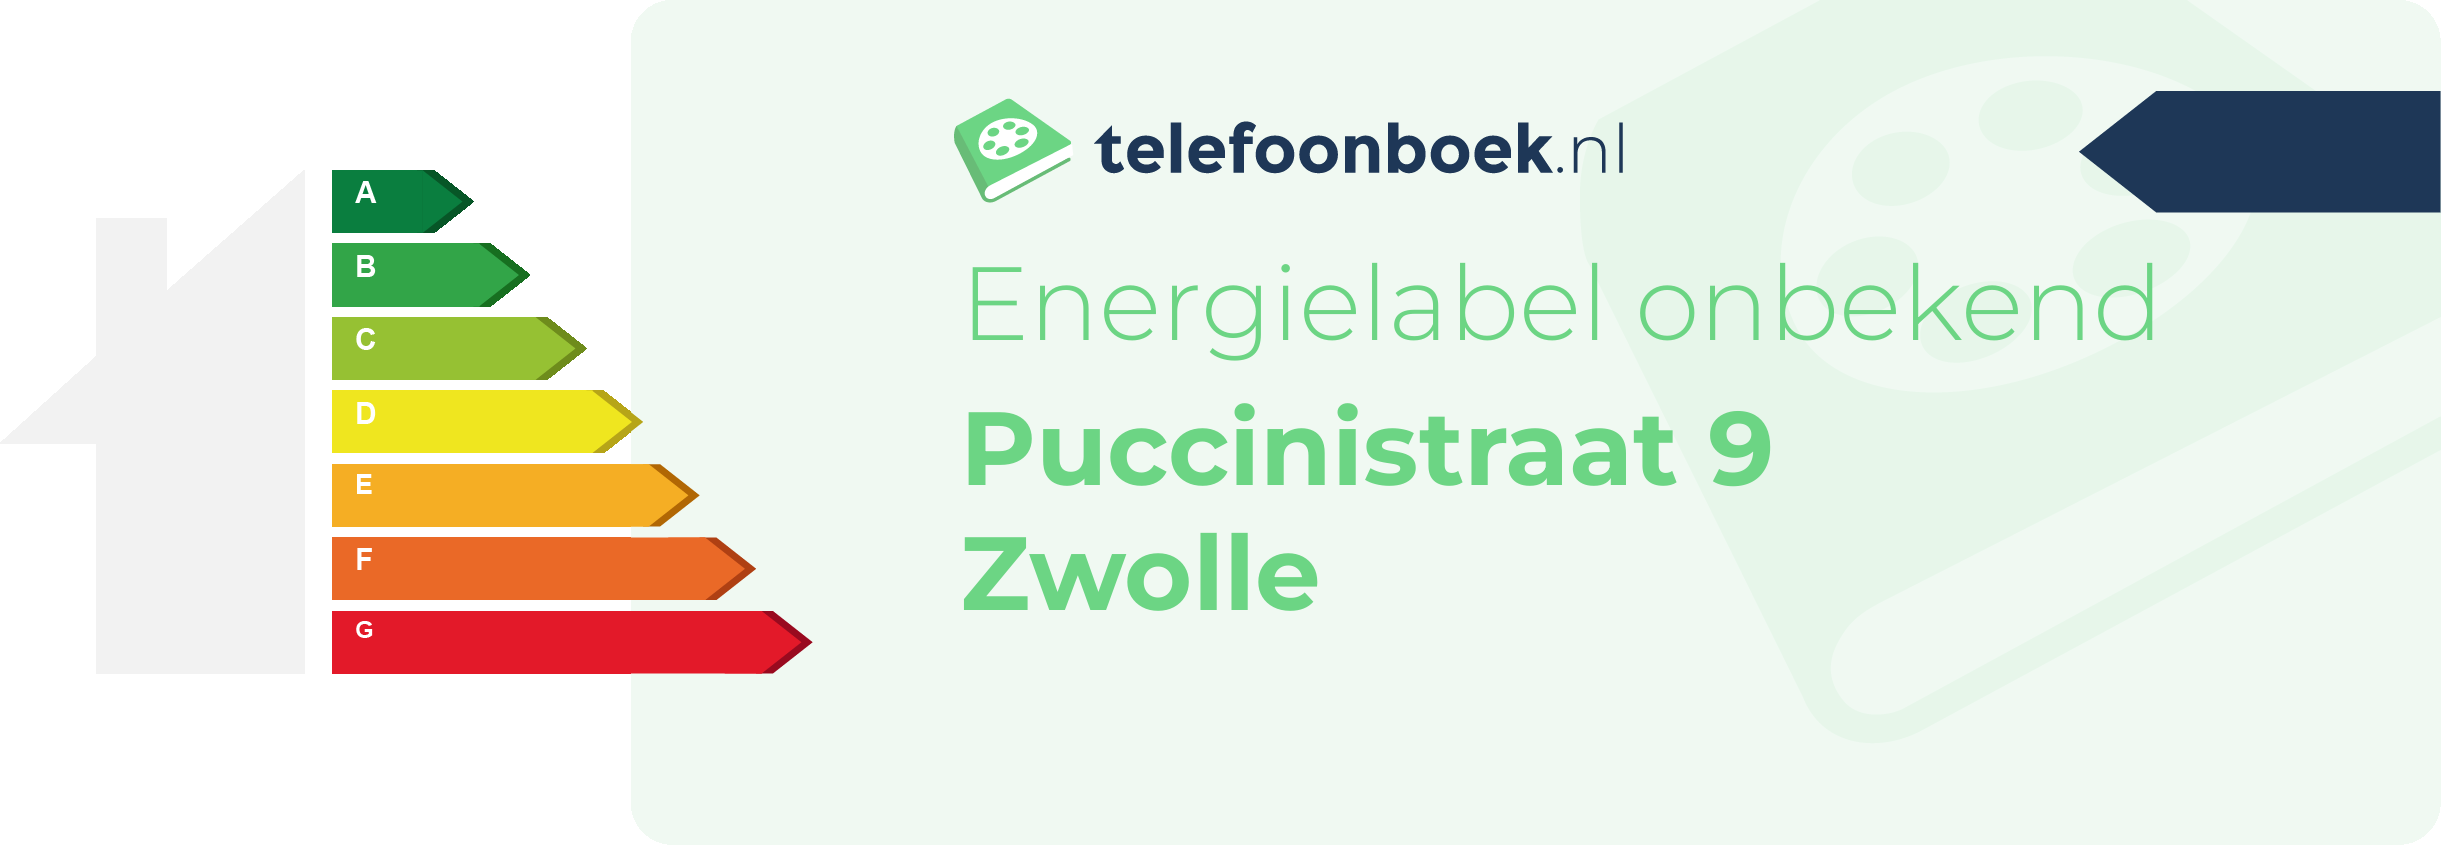 Energielabel Puccinistraat 9 Zwolle